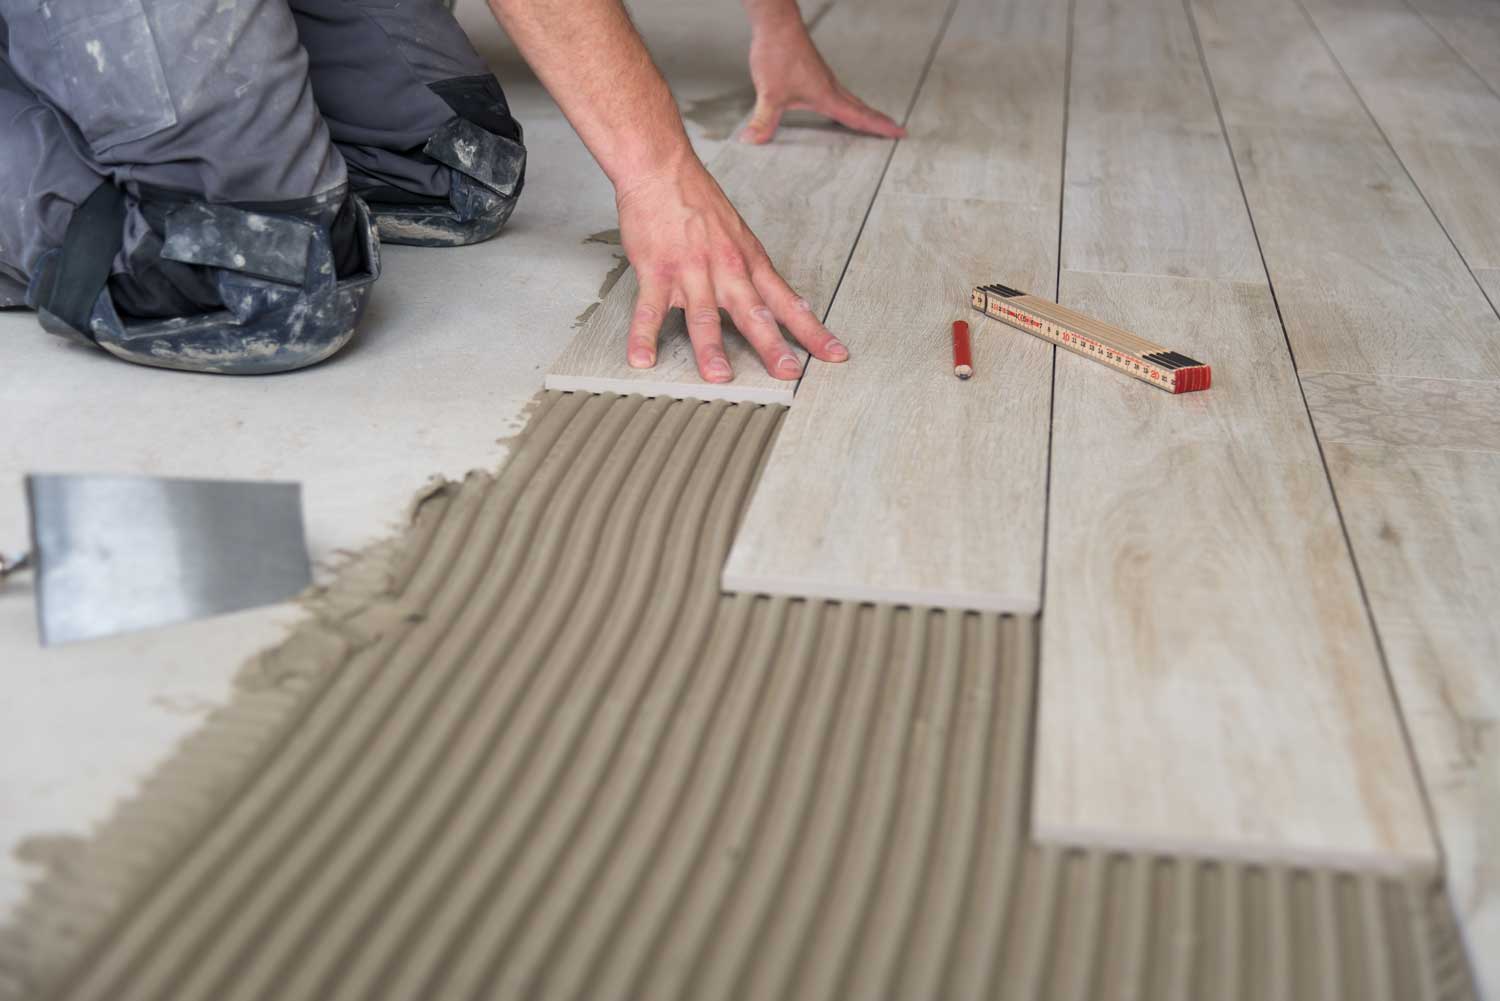 At Footprints Floors, our tile replacement experts in Sarasota / Venice get the job done.